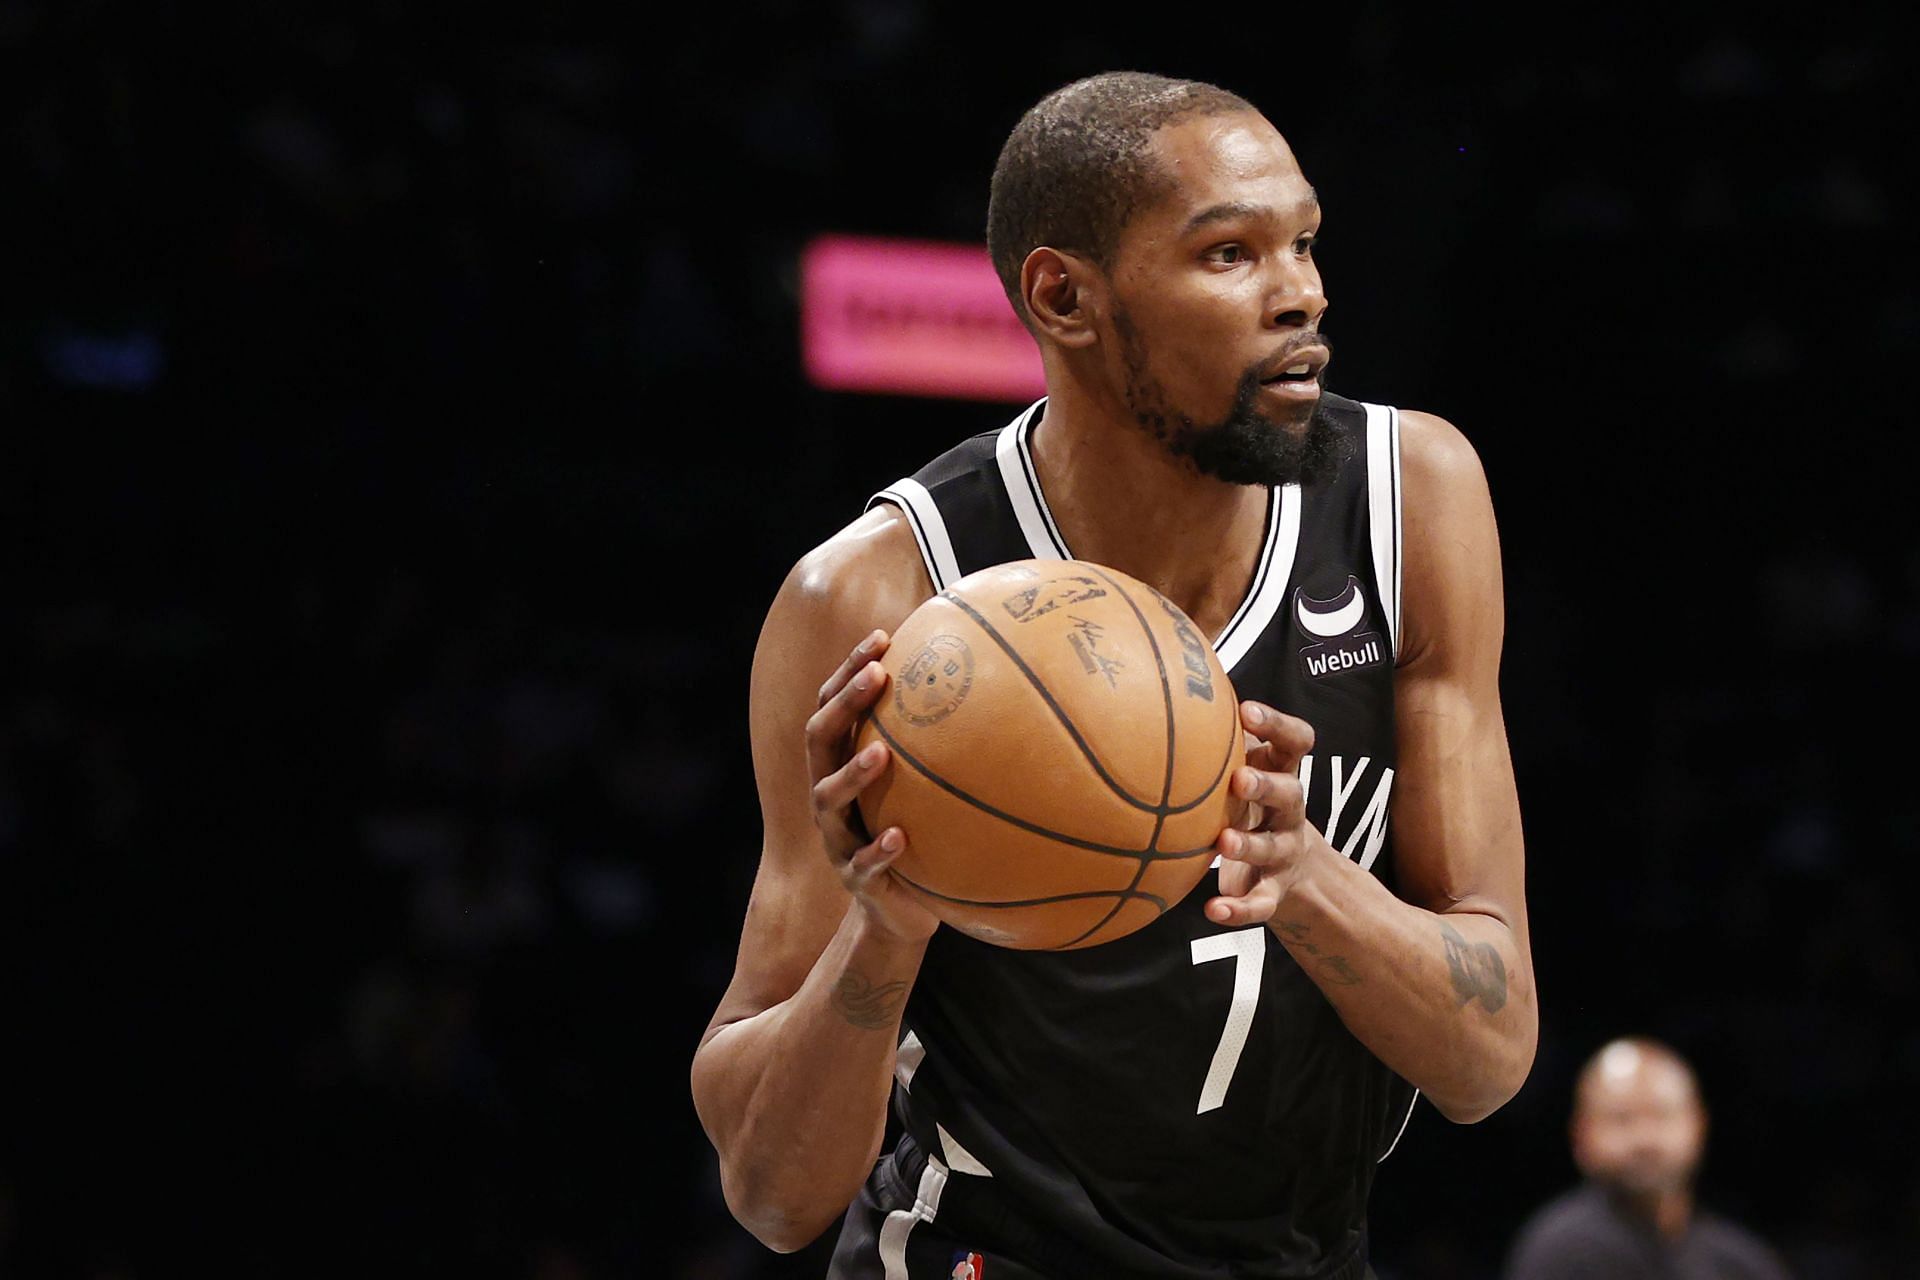 Kevin Durant of the Brooklyn Nets looks to pass during the Eastern Conference play-in tournament against the Cleveland Cavaliers at Barclays Center on April 12 in the Brooklyn borough of New York City.